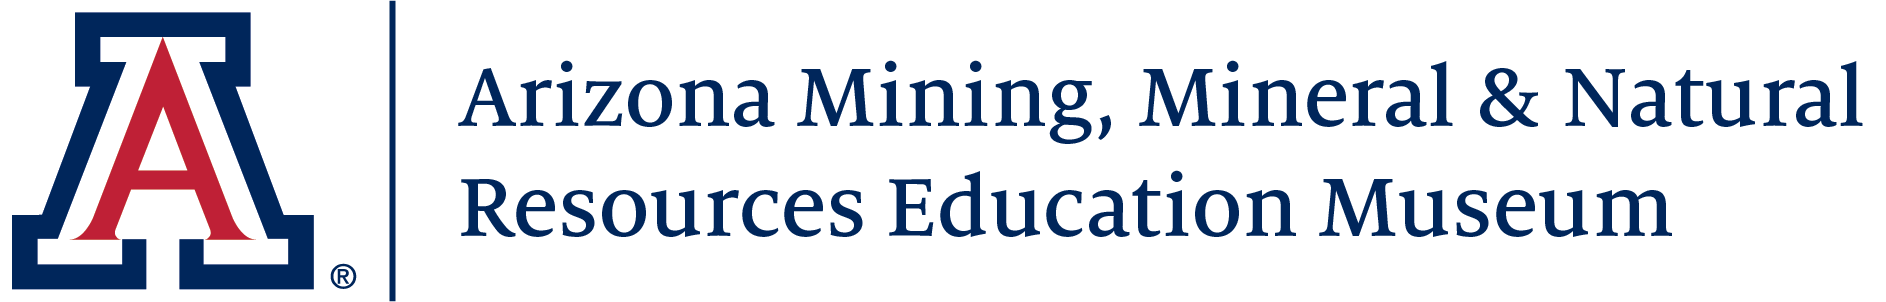 Arizona Mining, Mineral and Natural Resources Education Museum | Home